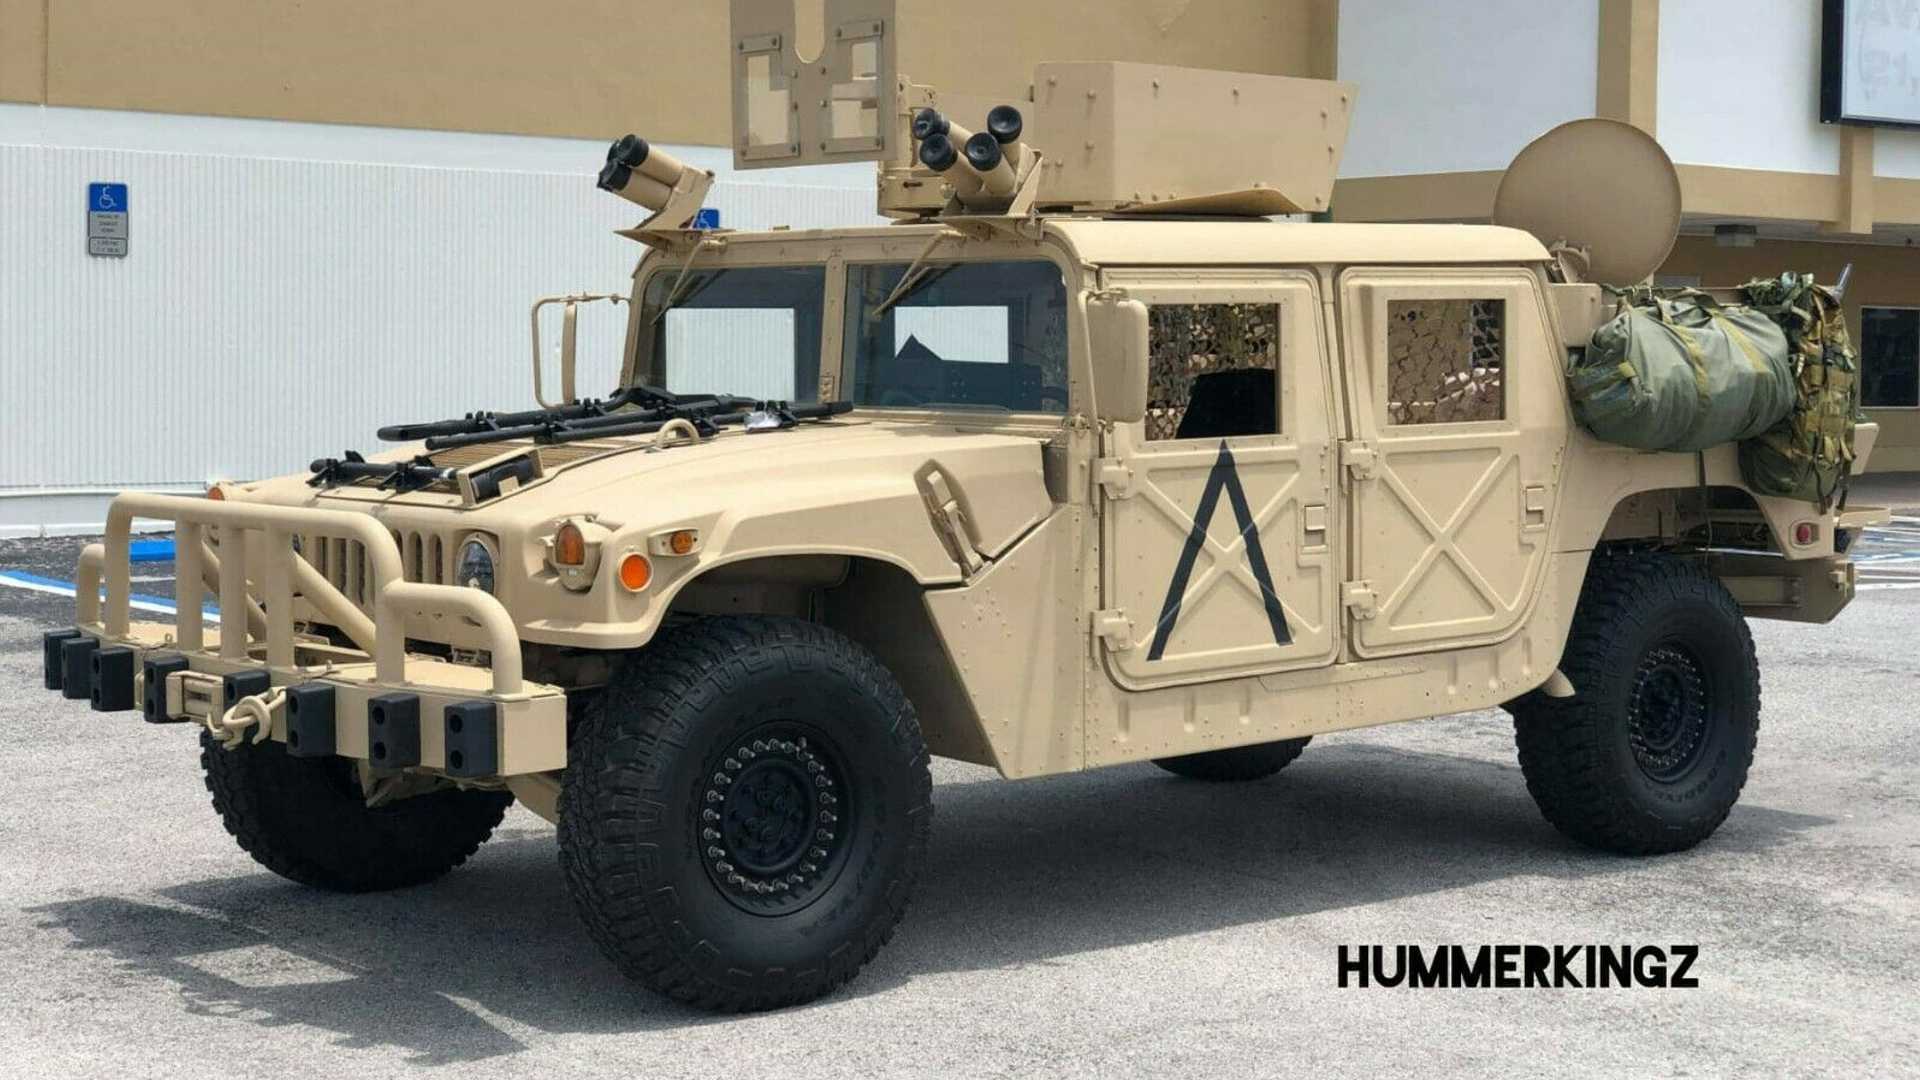 Military Hummer Shows Up On eBay For $500